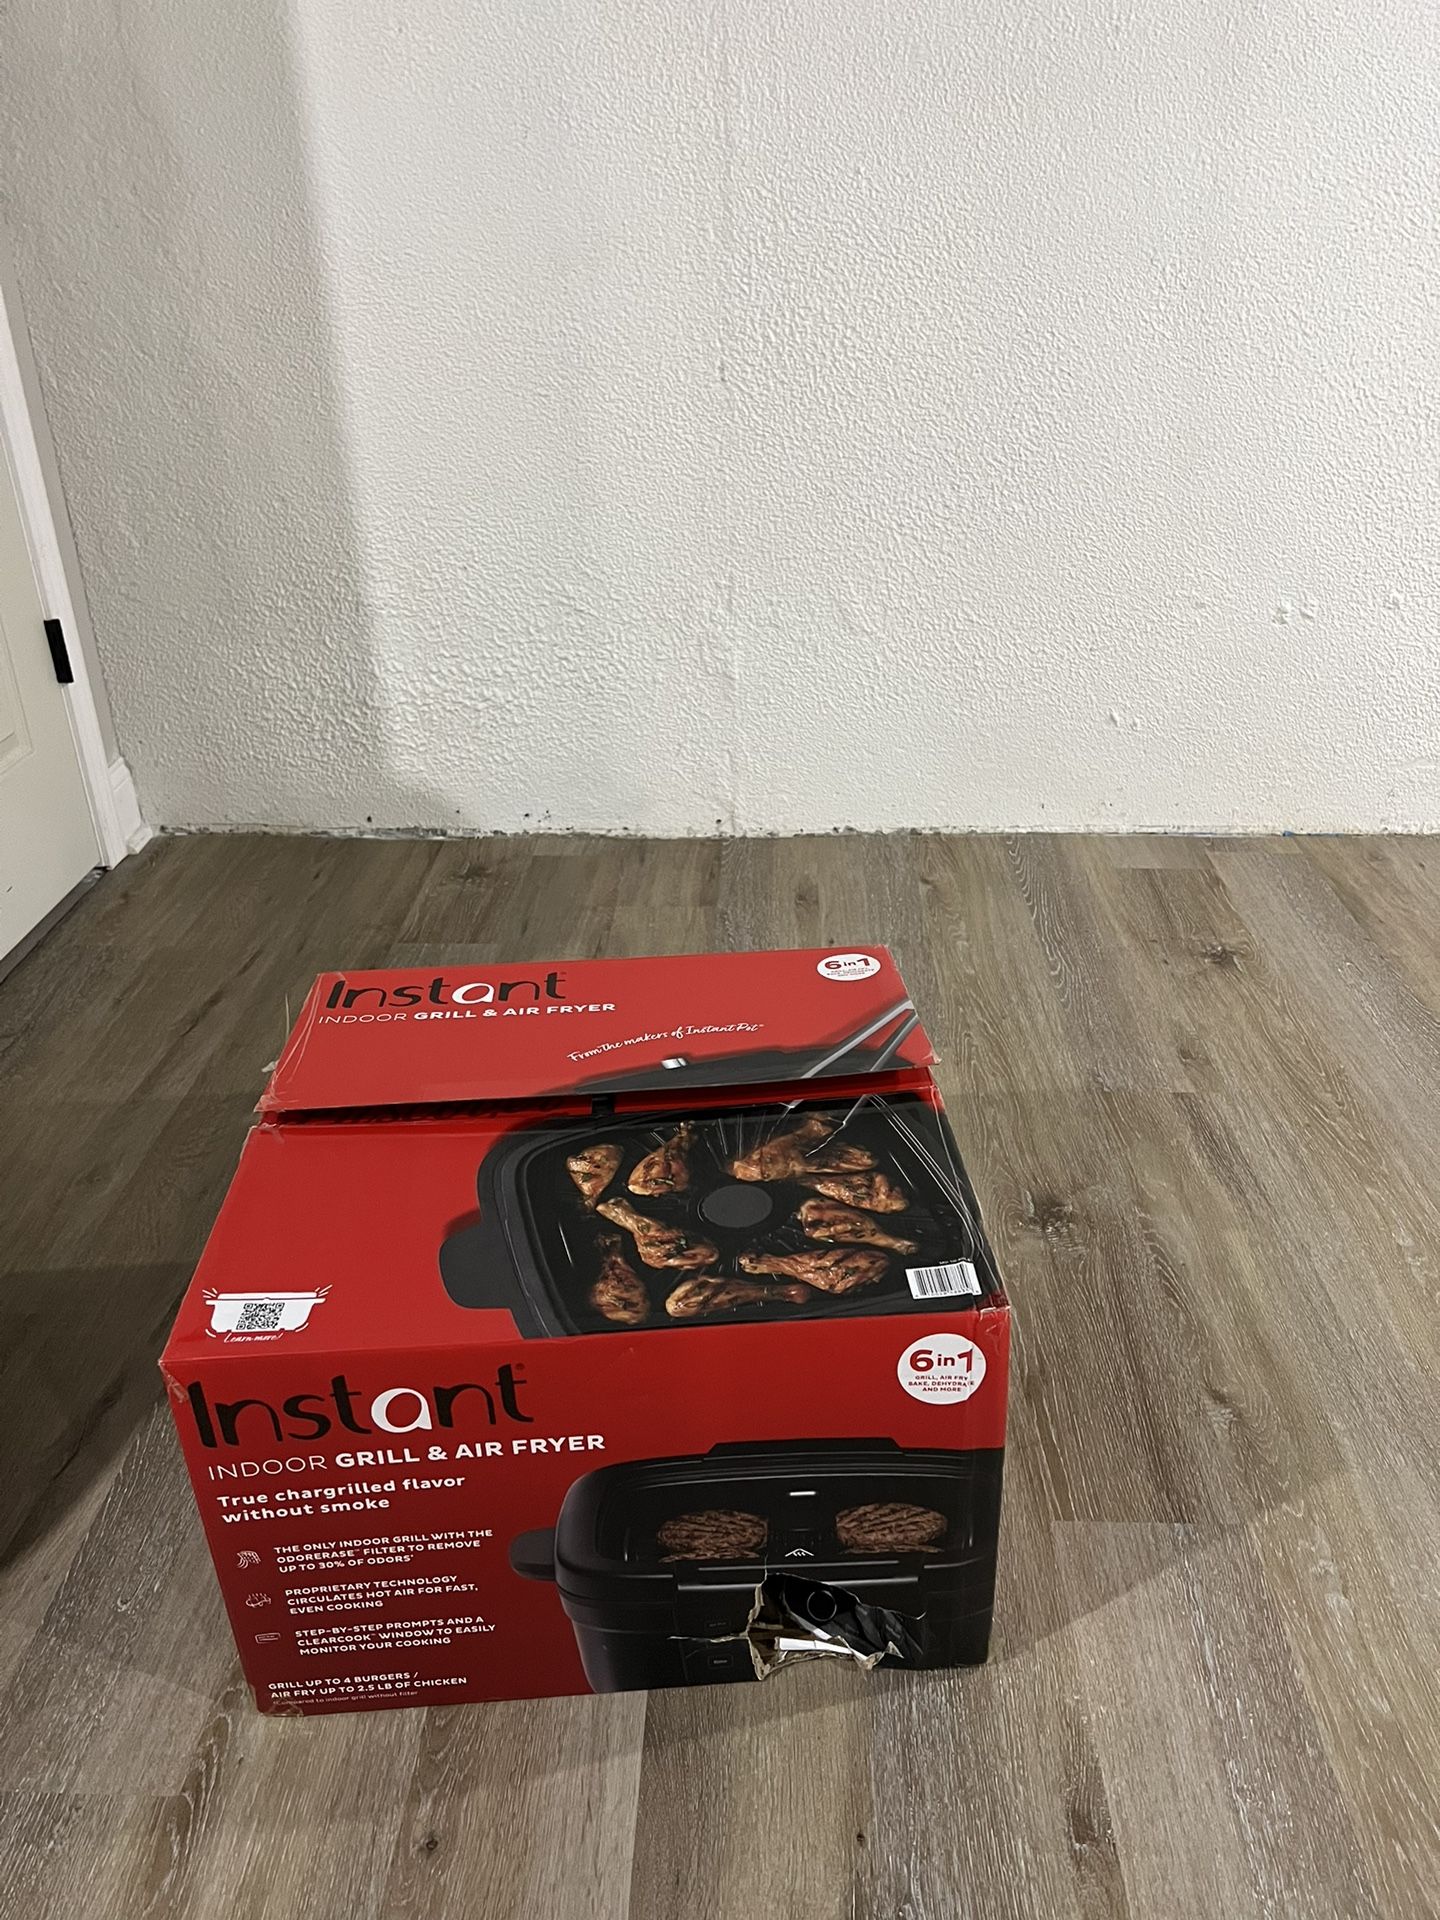 Brand New Air Fryer And Grill Never Opened 